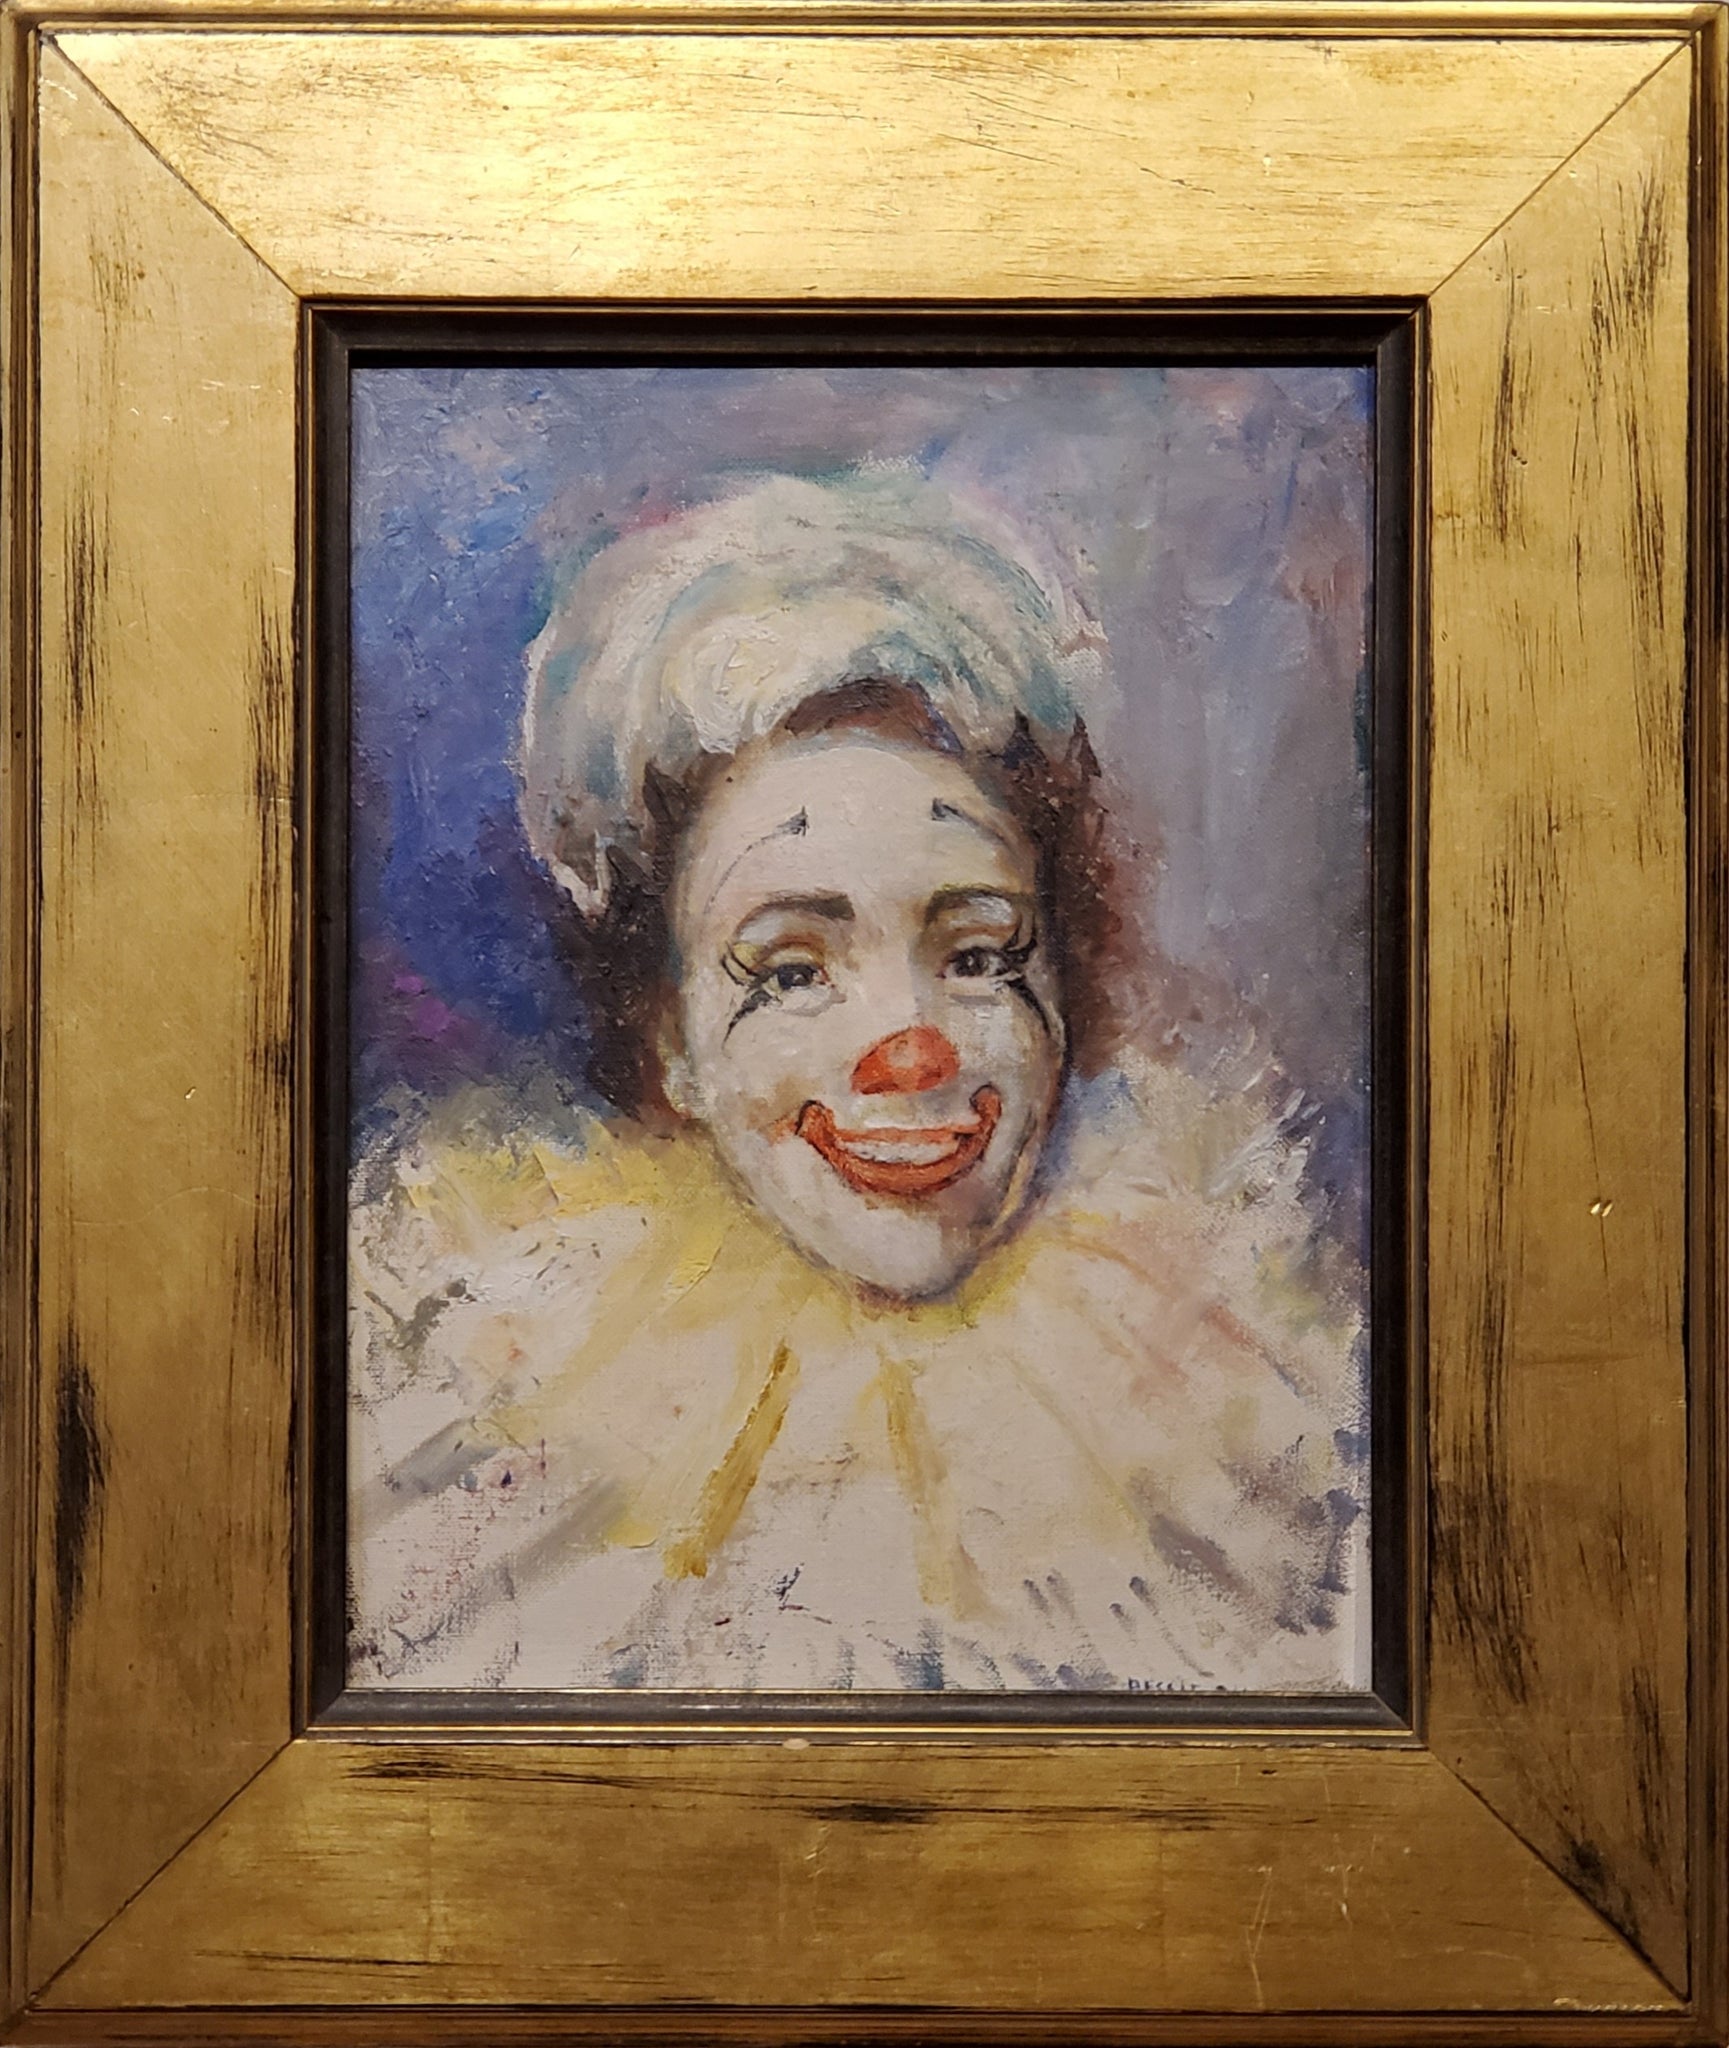 Gold Framed Vintage Oil Painting of a Clown signed by Bessie Howard circa 1935.